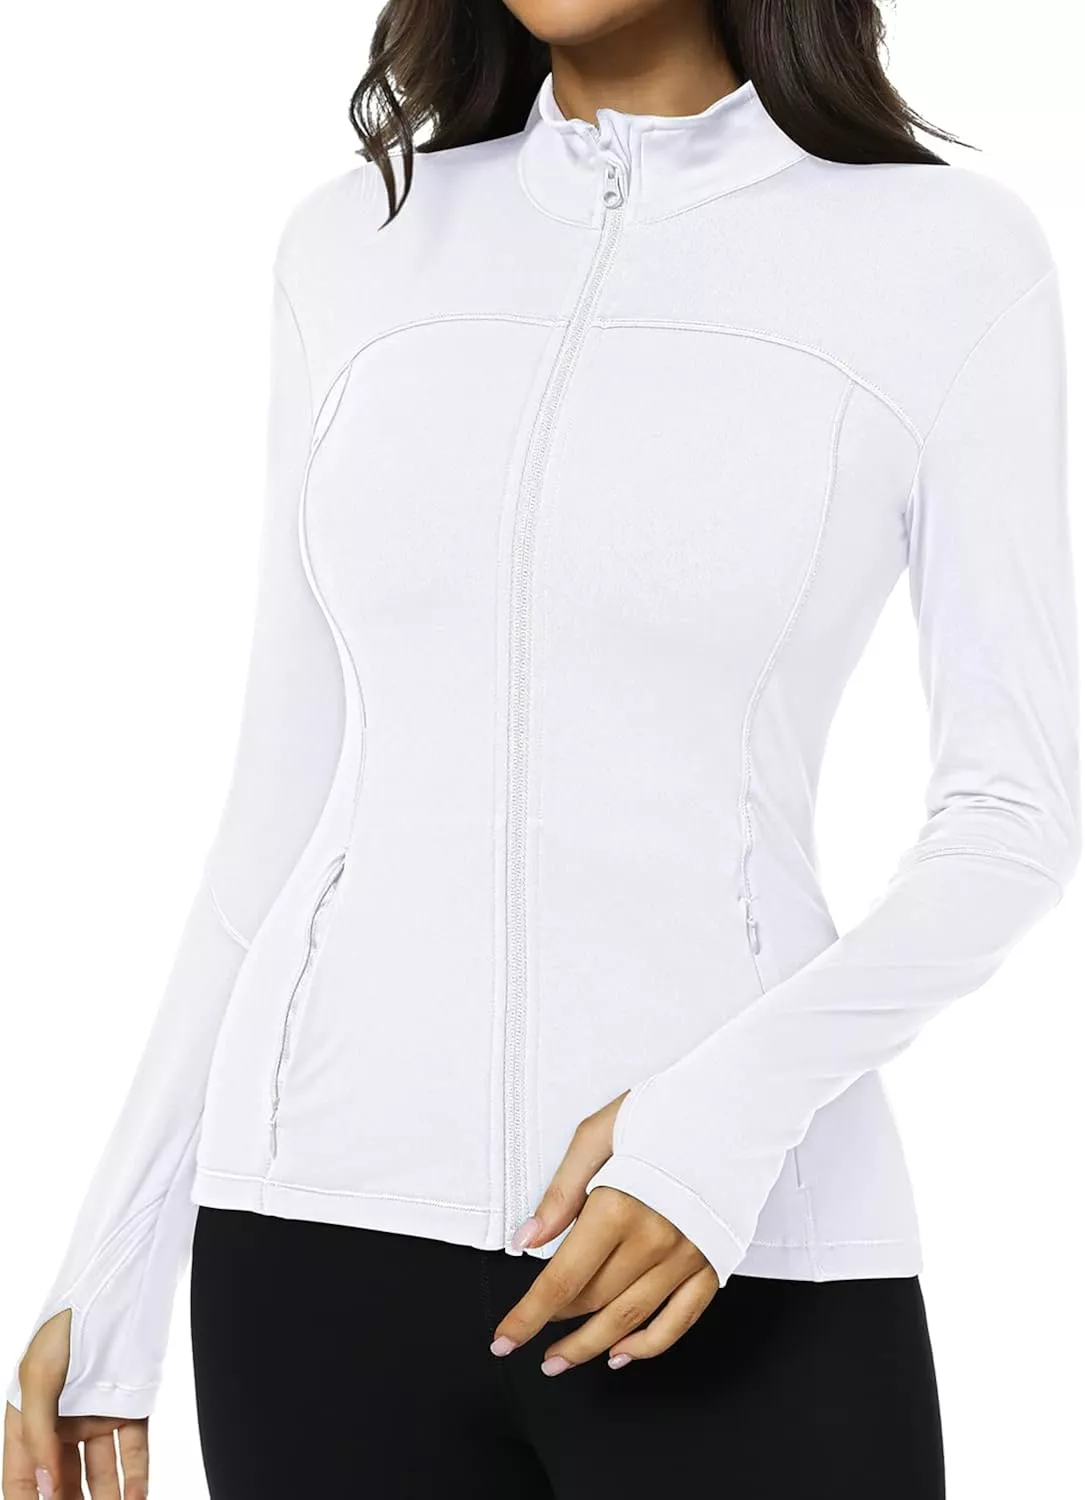 CRZ YOGA Butterluxe Womens Cropped Slim Fit Workout Jackets - Weightless  Track Athletic Full Zip Jacket with Thumb Holes Black XX-Small at   Women's Clothing store